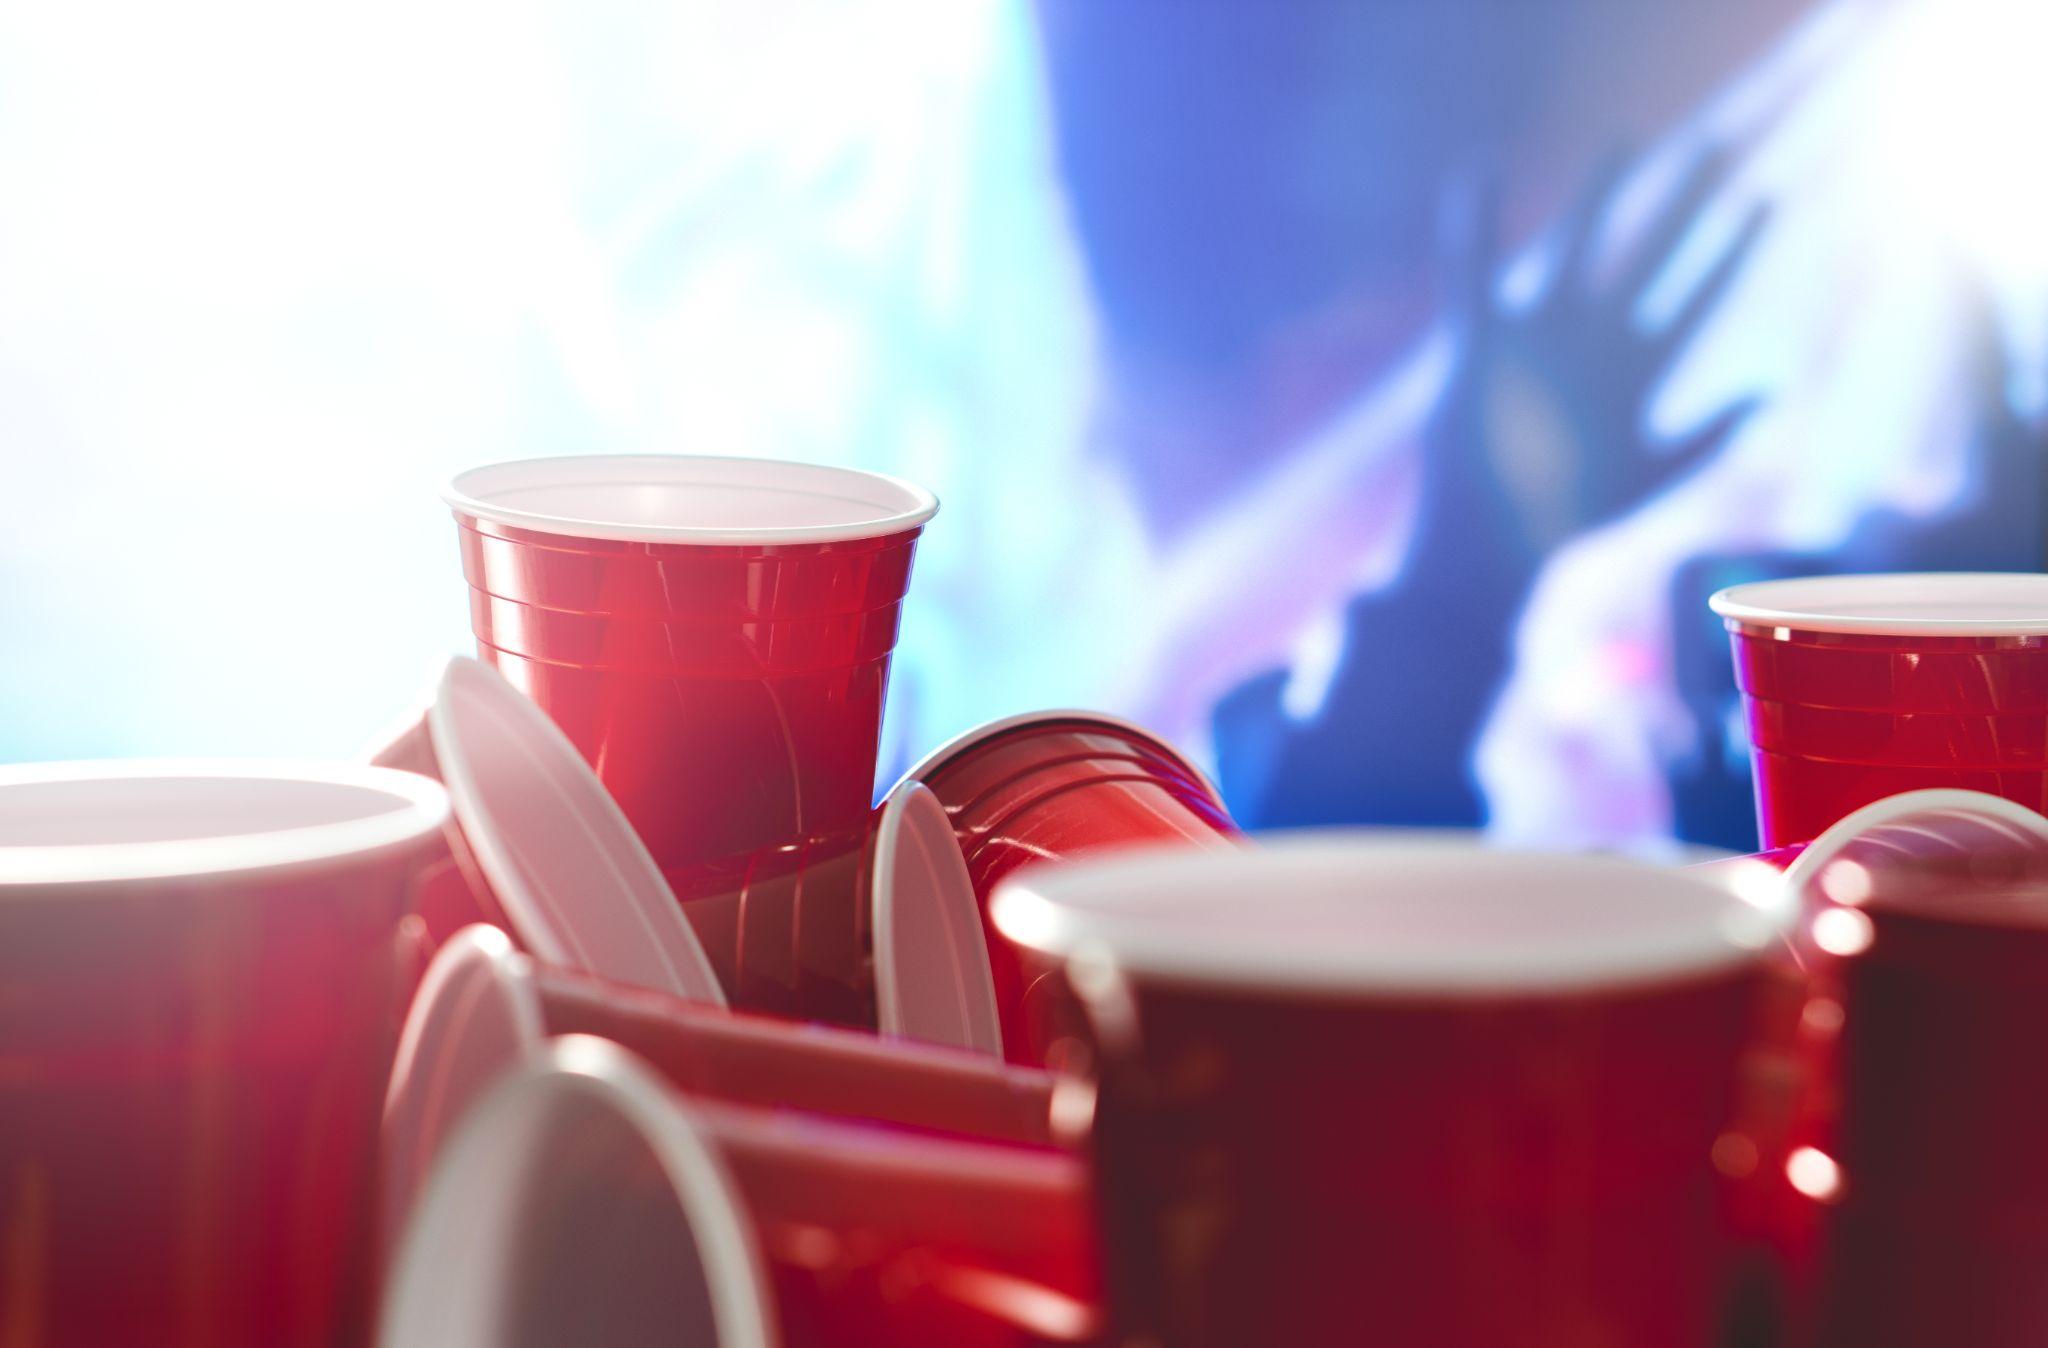 Many red party cups with blurred celebrating people in the background.